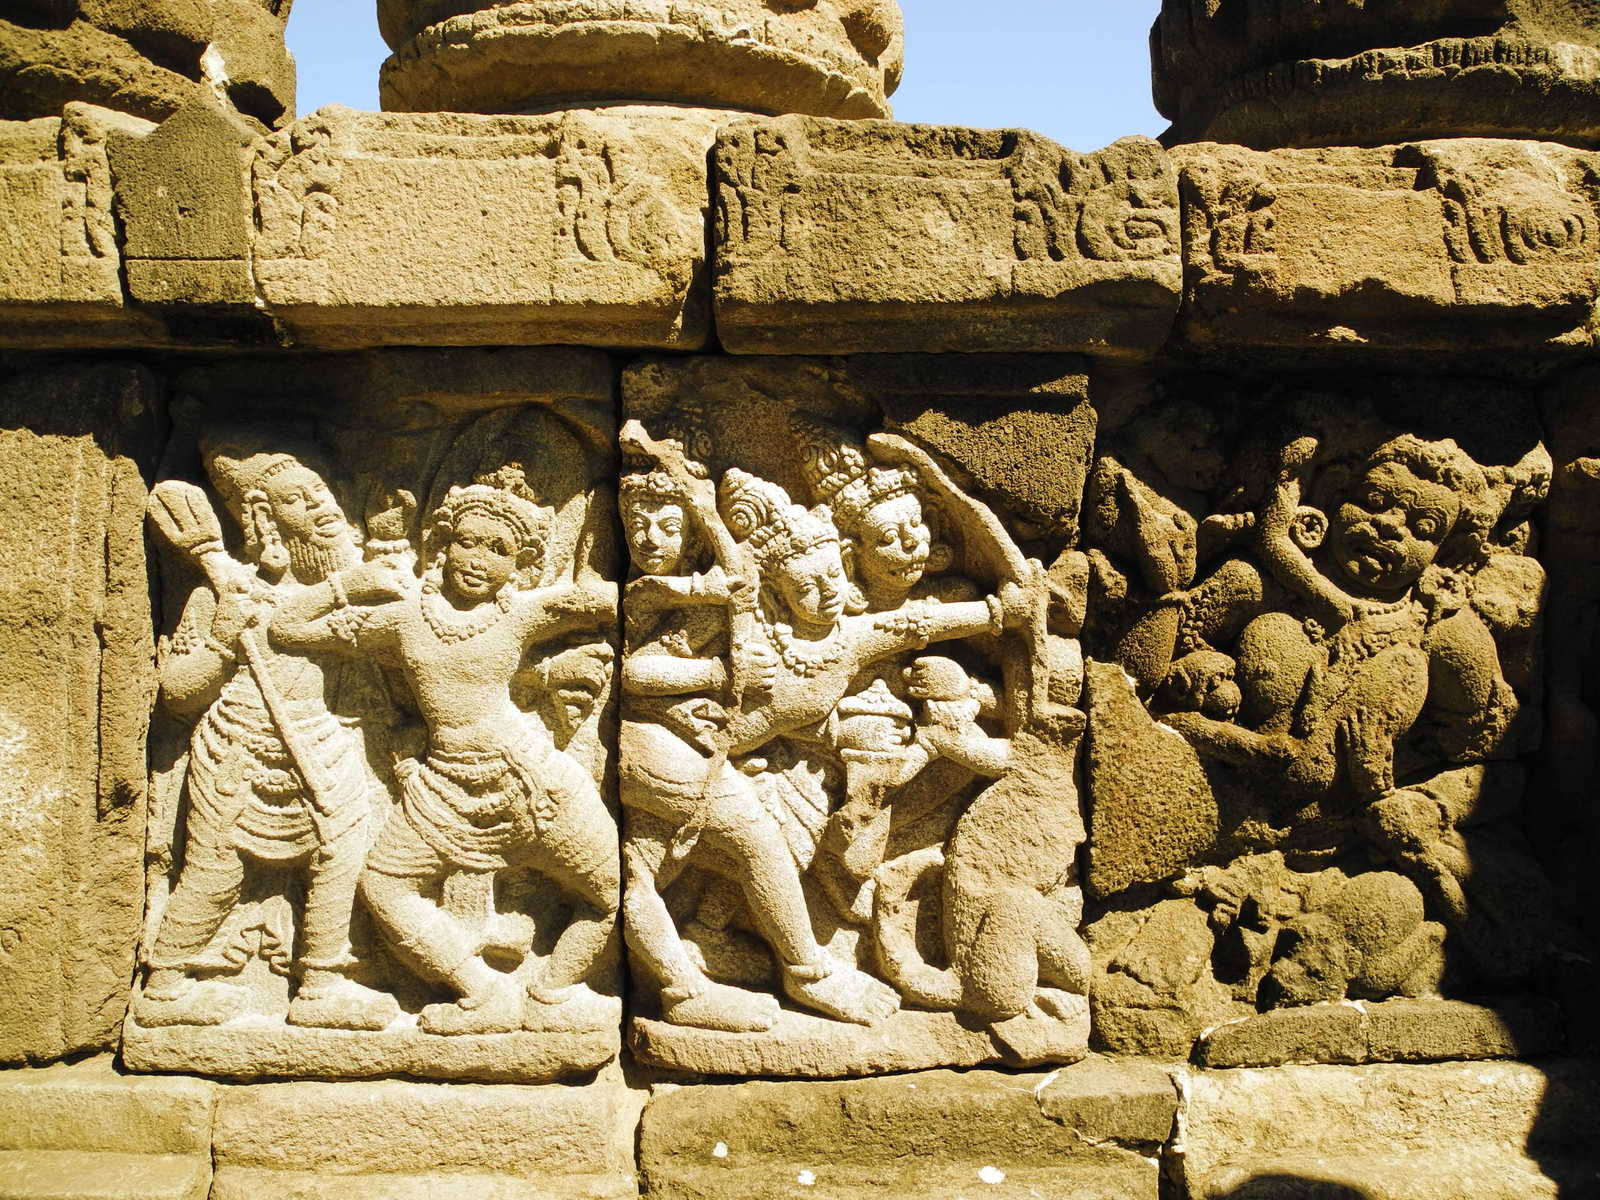 stone carving showing indian deities holding arms out